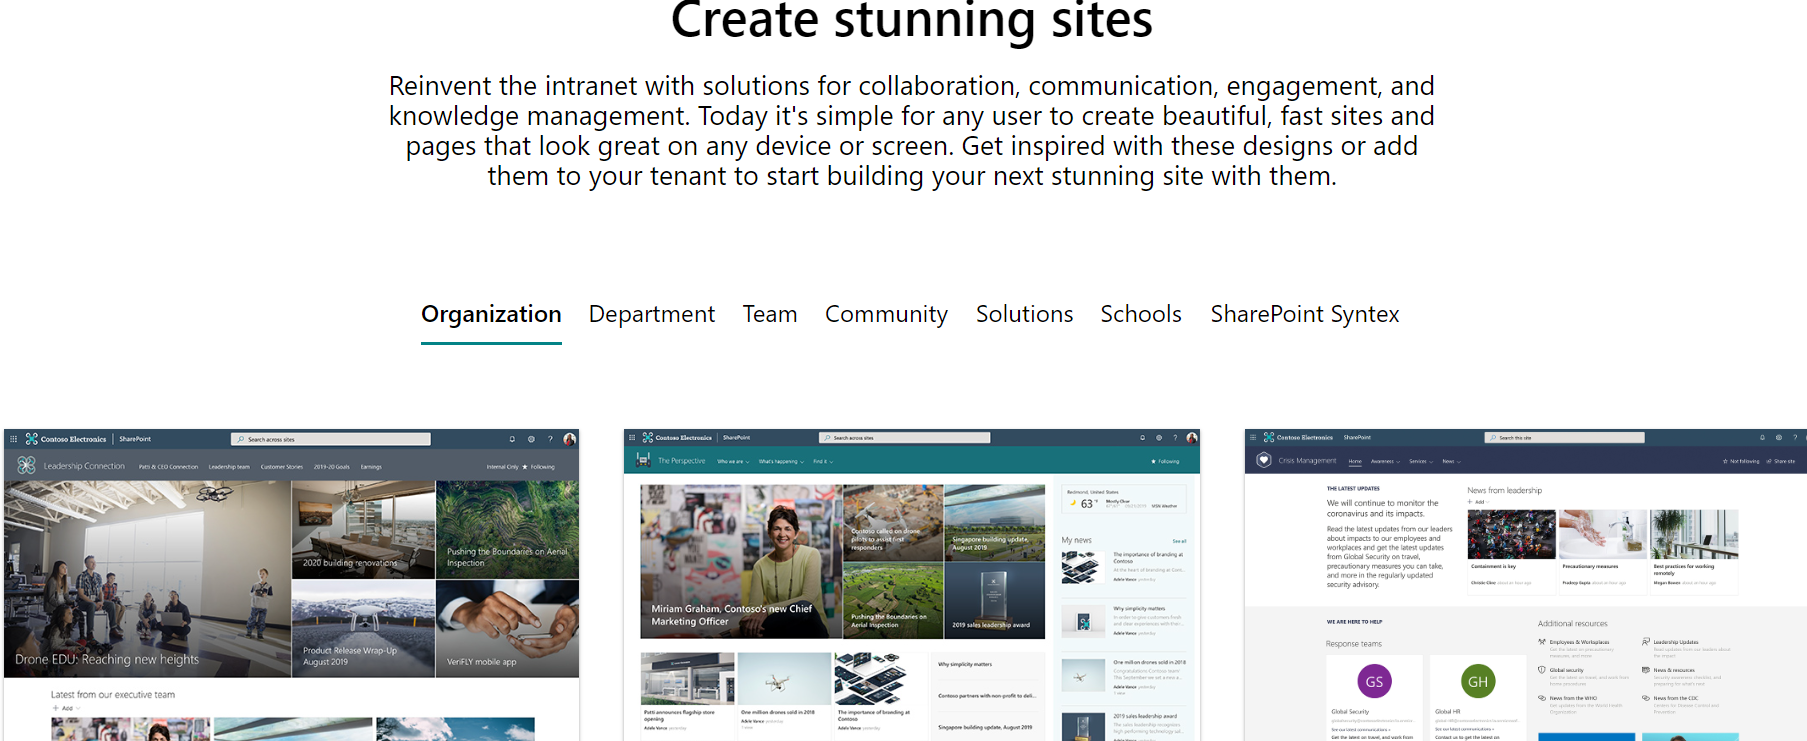 Create a stunning site with sharepoint templates on the next page